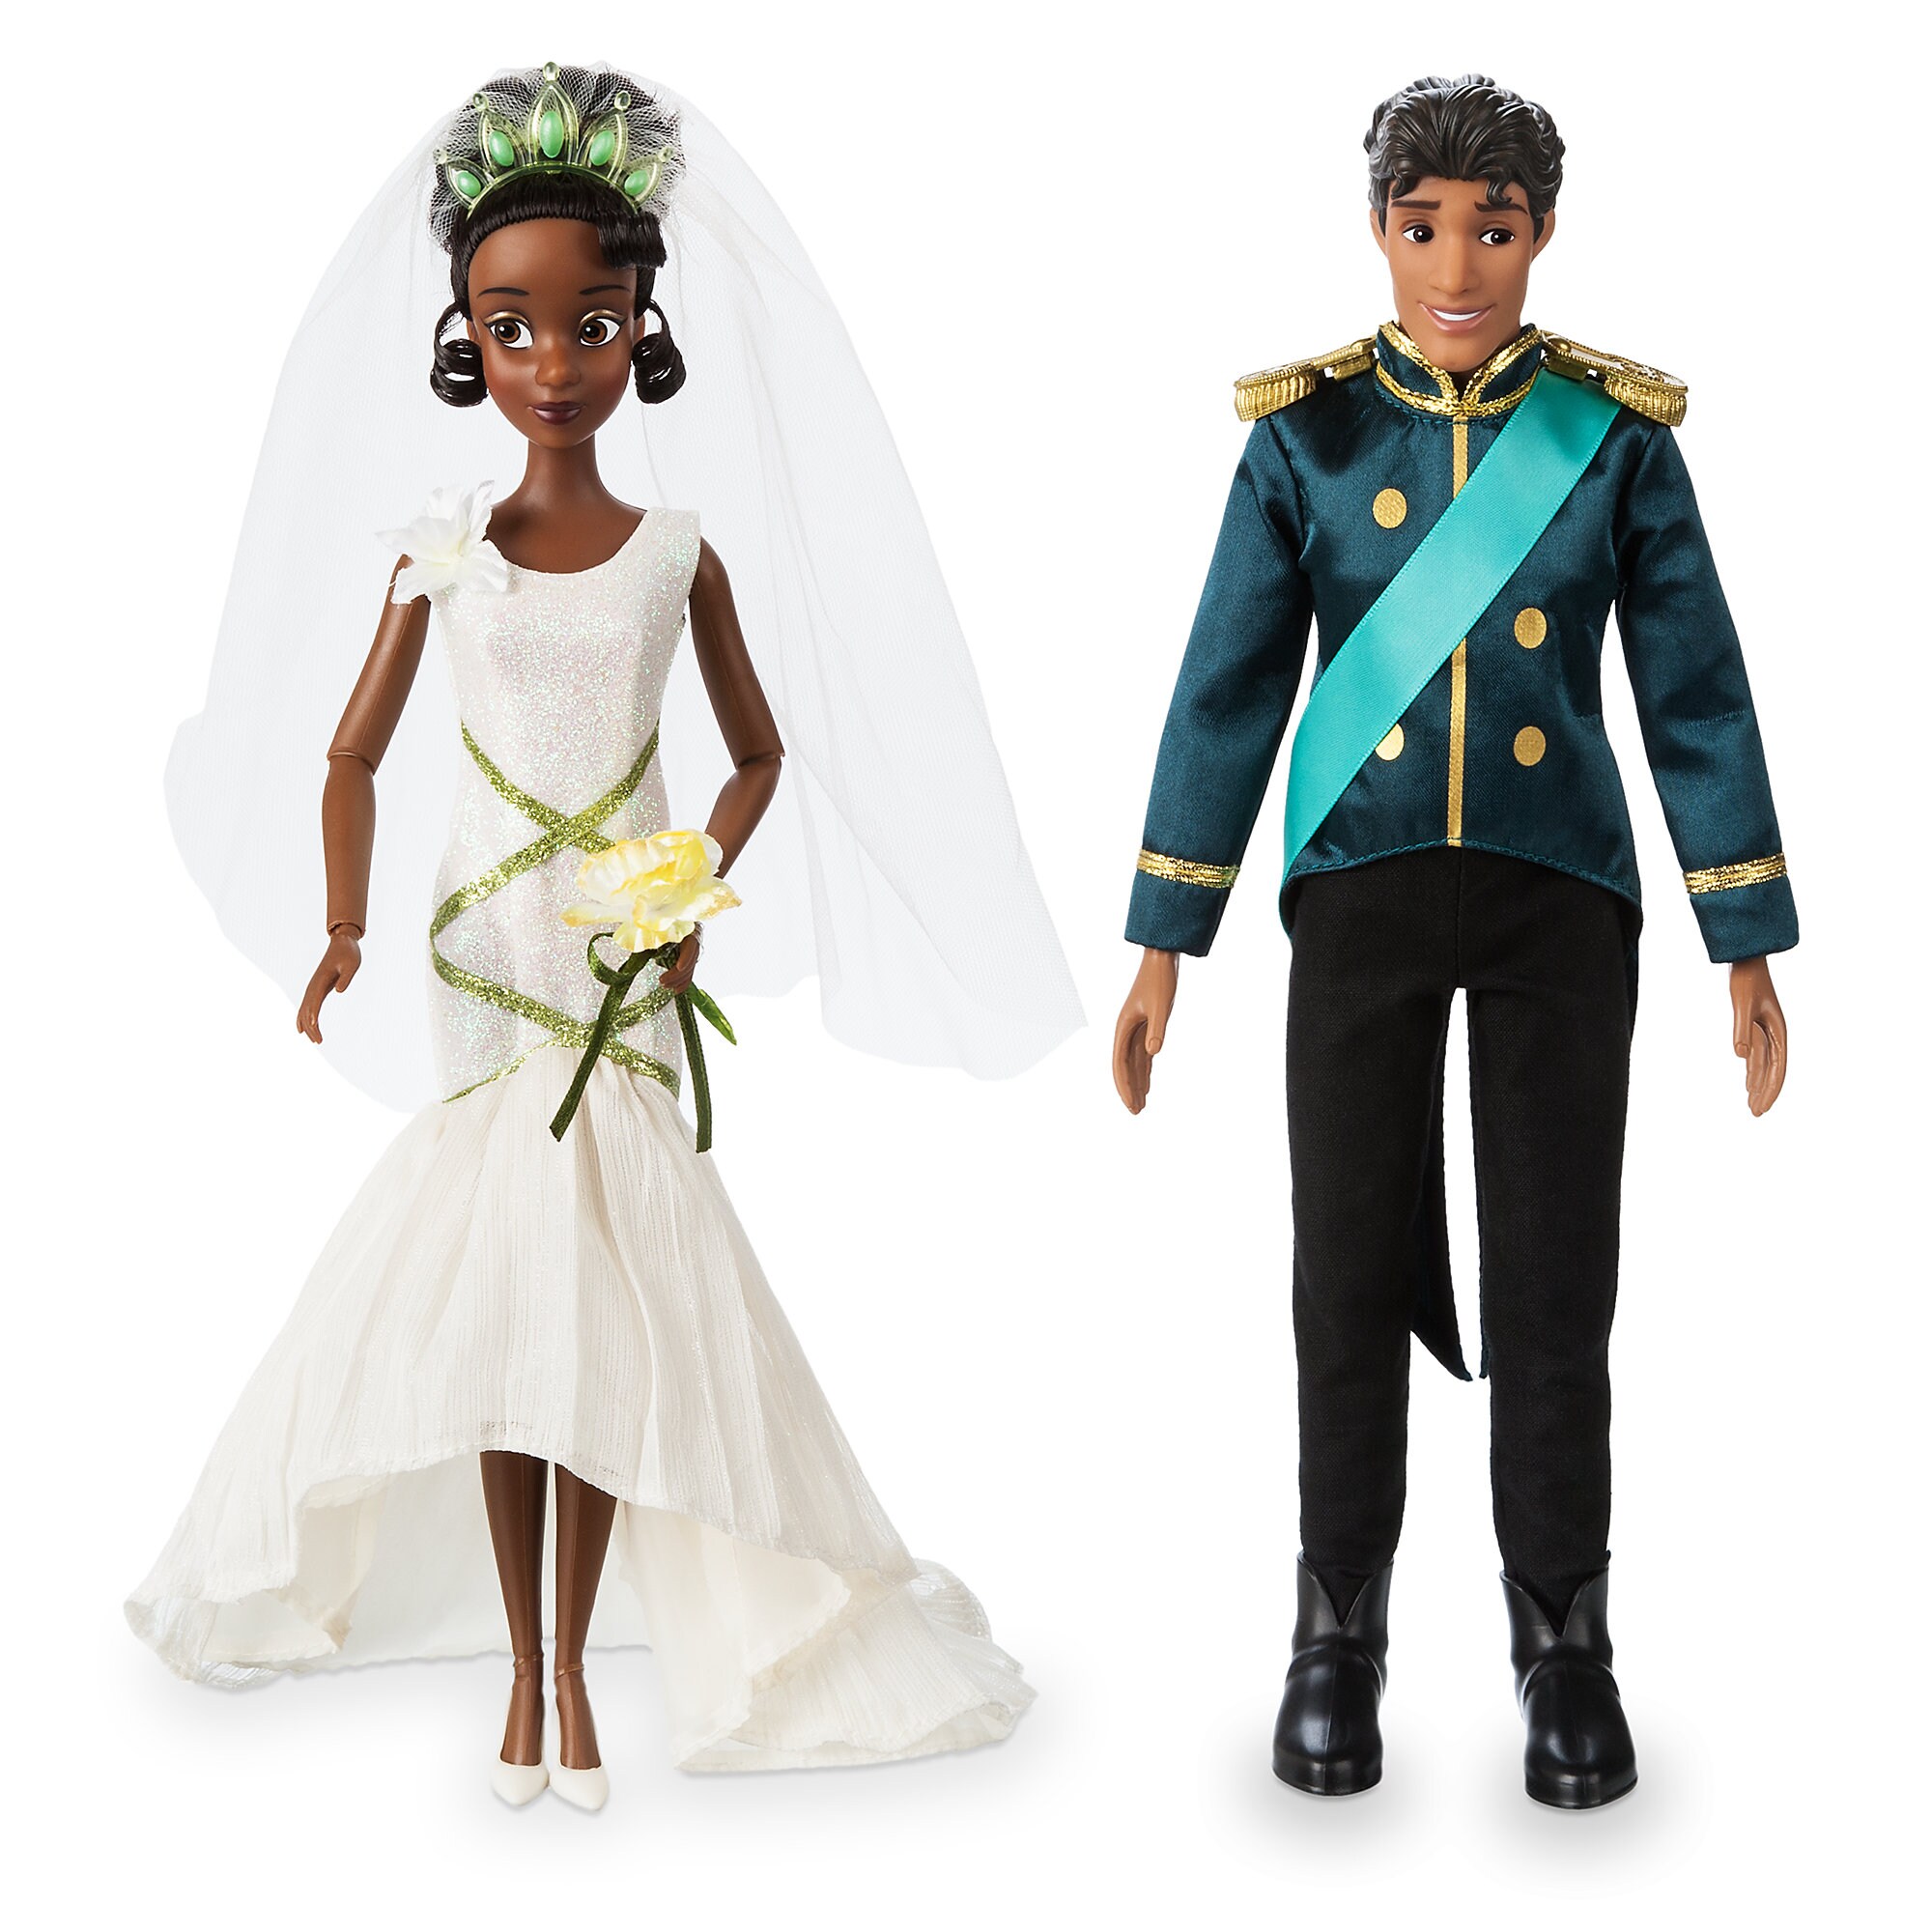 Tiana and Naveen Classic Wedding Doll Set - The Princess and the Frog